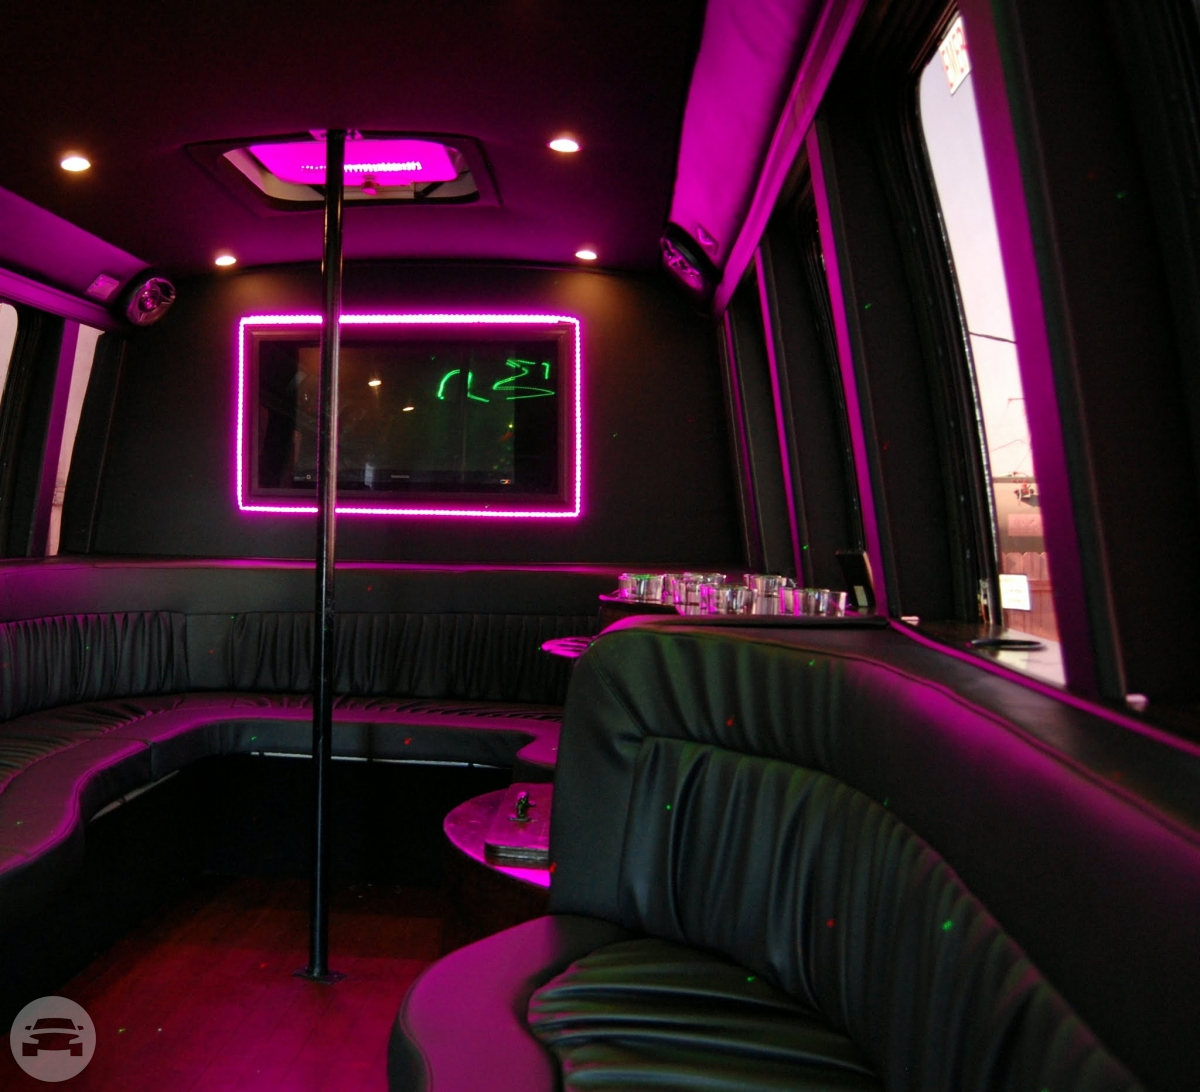 White 14-16 Passenger Party Bus
Party Limo Bus /
Metairie, LA

 / Hourly $0.00
